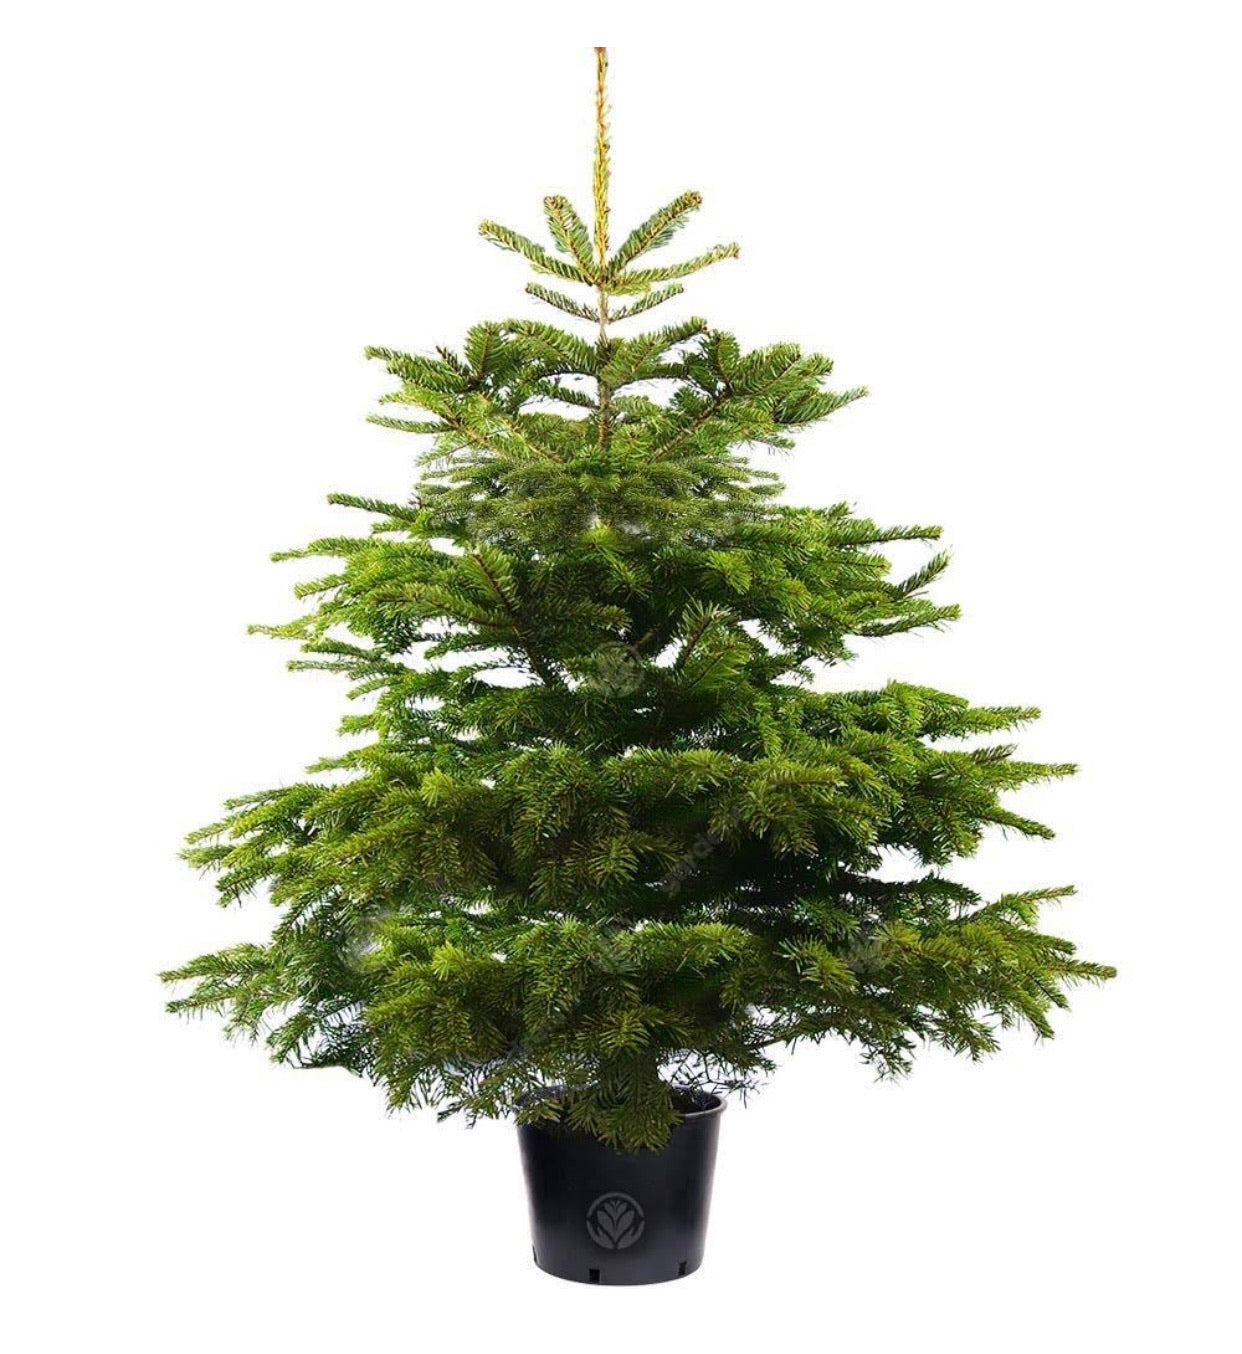 5FT Potted Nordmann Fir Christmas Tree with 100 Battery Lights